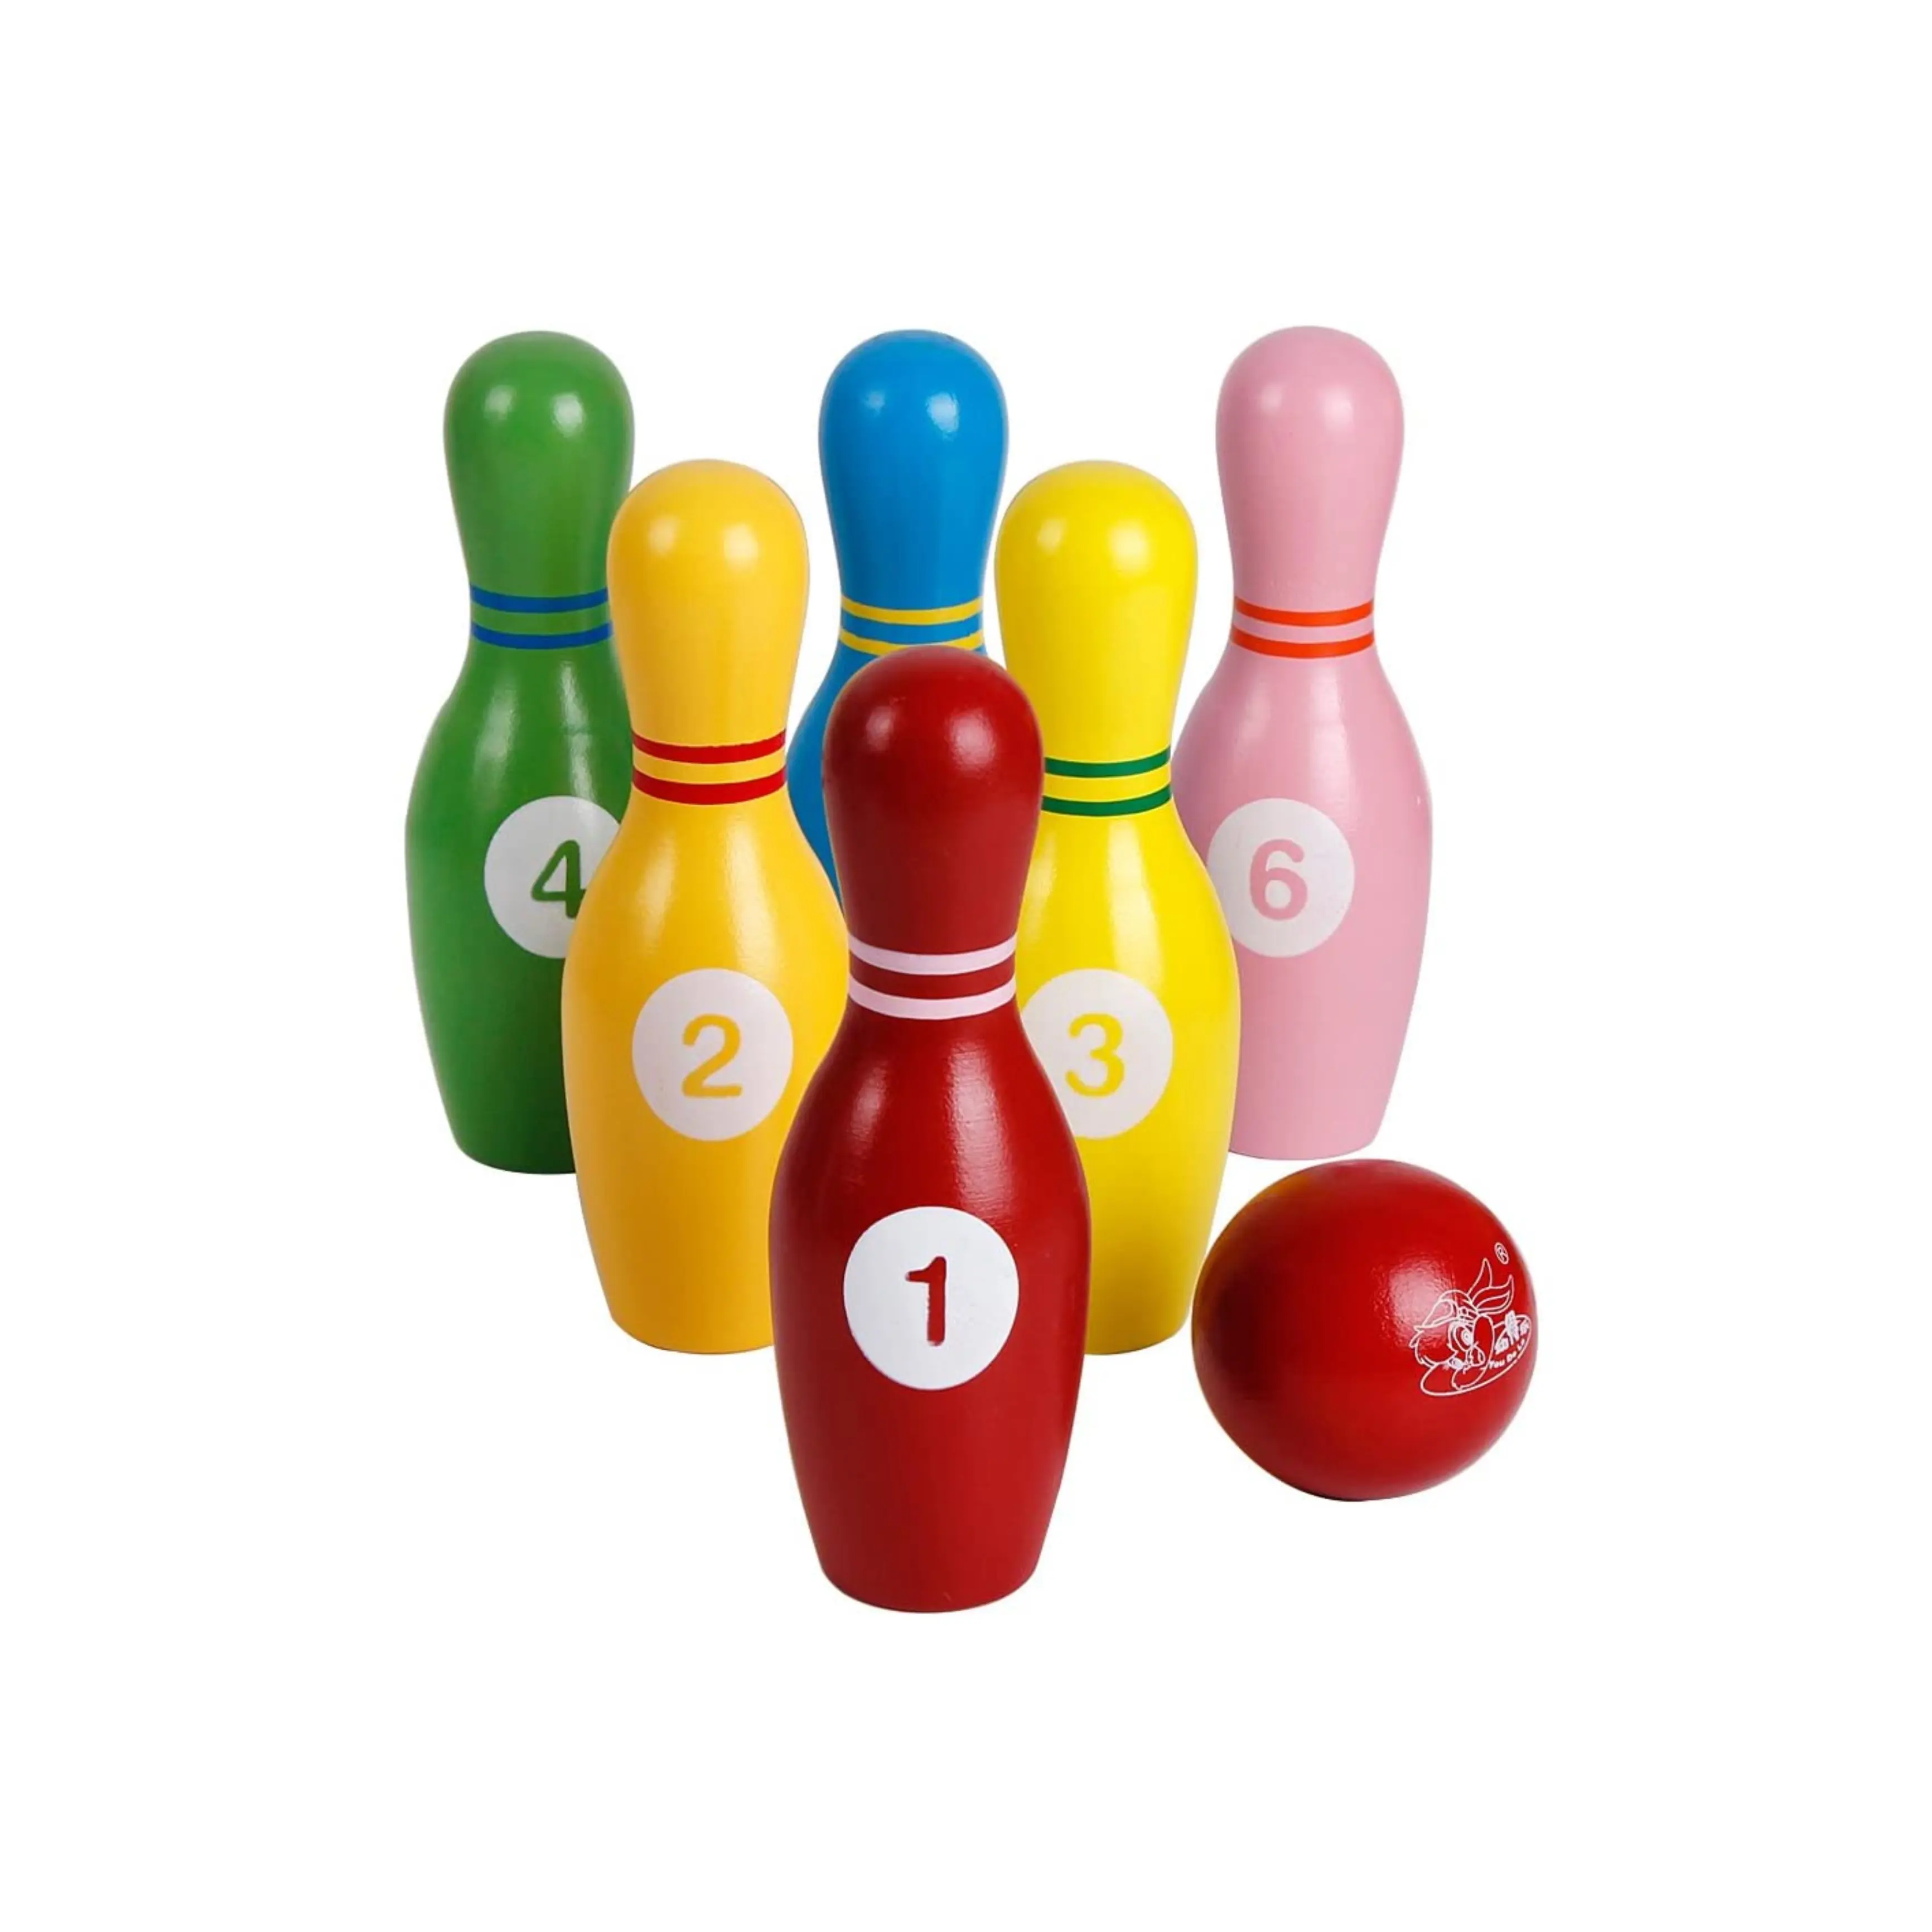 OEM Lawn Bowling Game/Skittle Ball- Indoor and Outdoor Fun for Toddlers